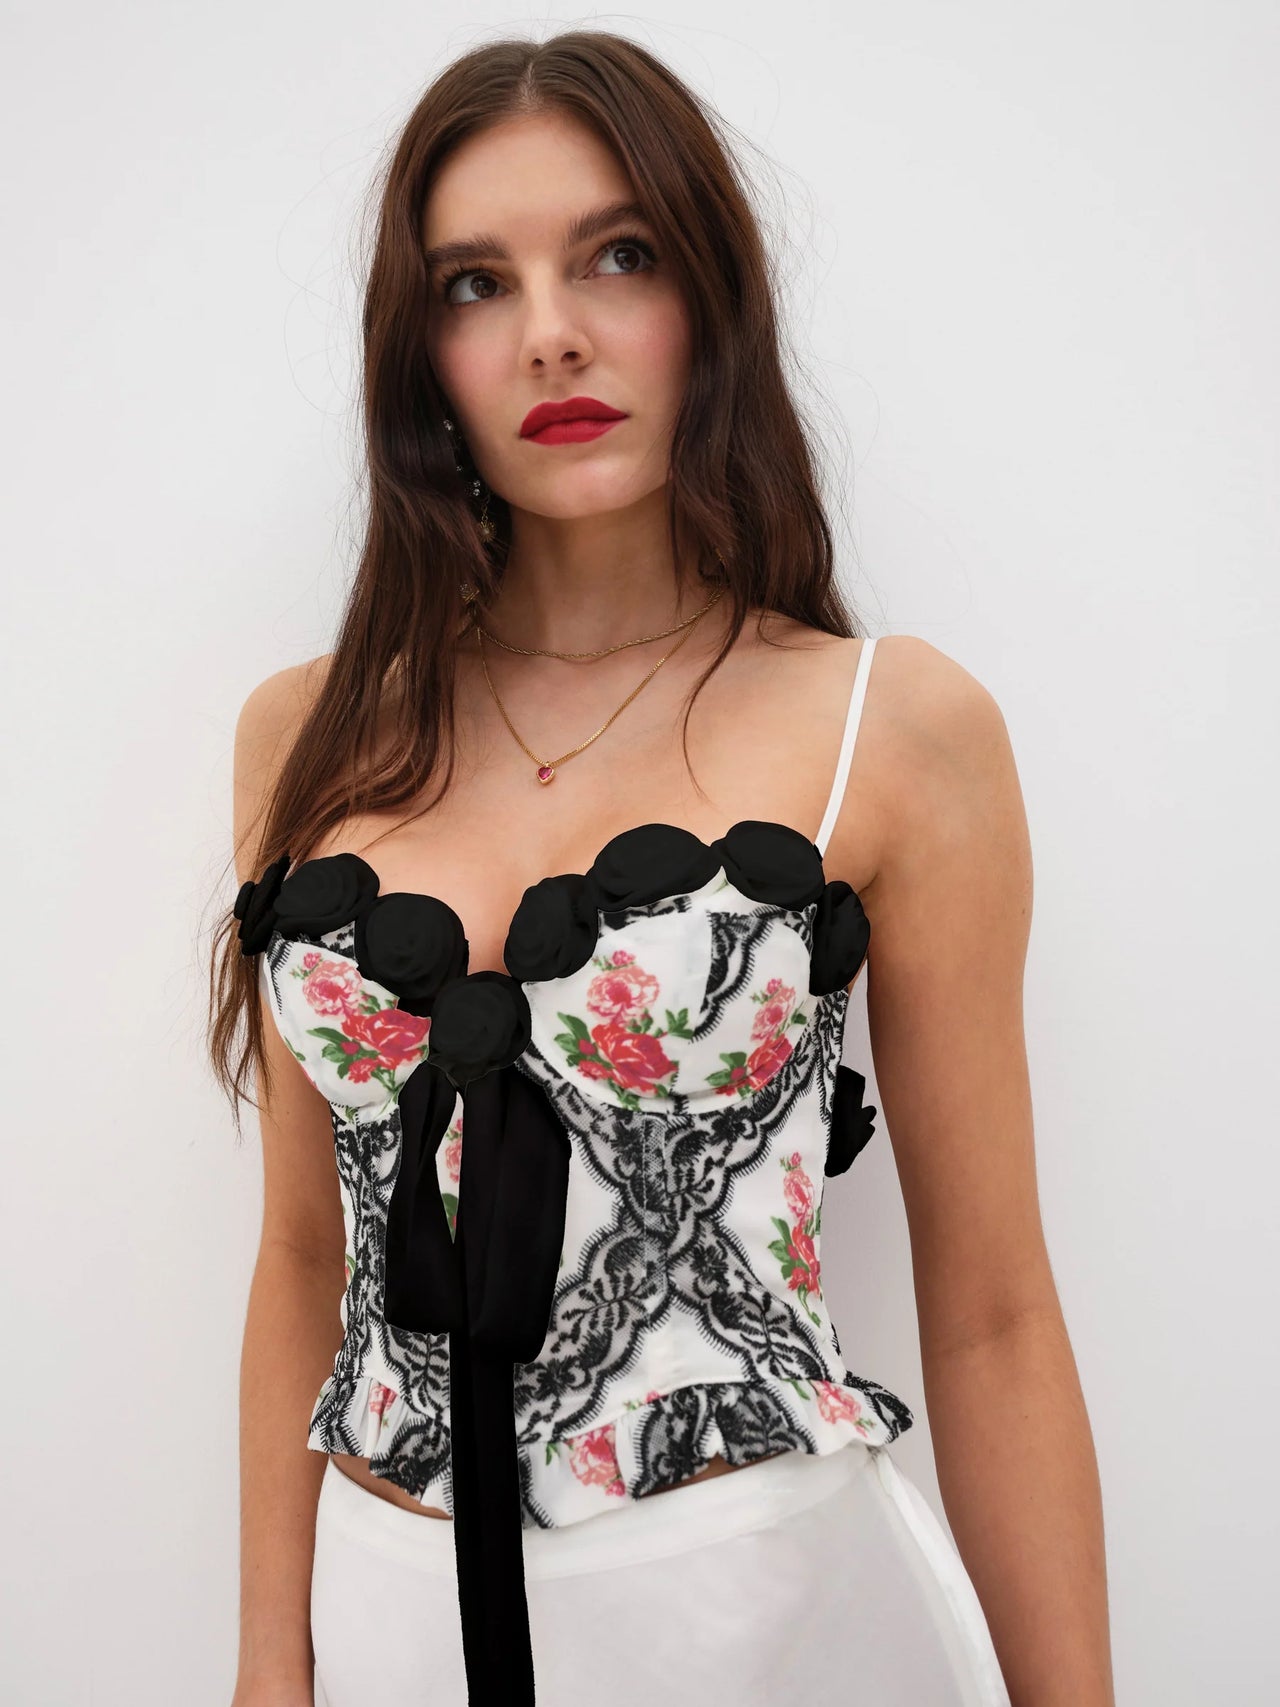 Corset Top With Feathers Camisole Top With Support Big Bust Corset